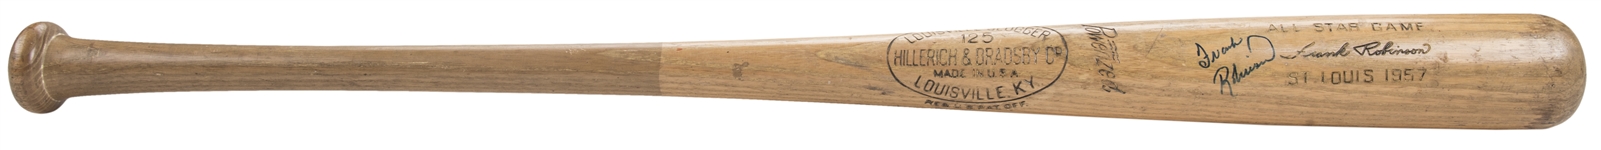 1957 Frank Robinson All-Star Game Used & Signed Hillerich & Bradsby K55 Model Bat - First All-Star Game Appearance! (PSA/DNA GU 8.5 & Beckett)